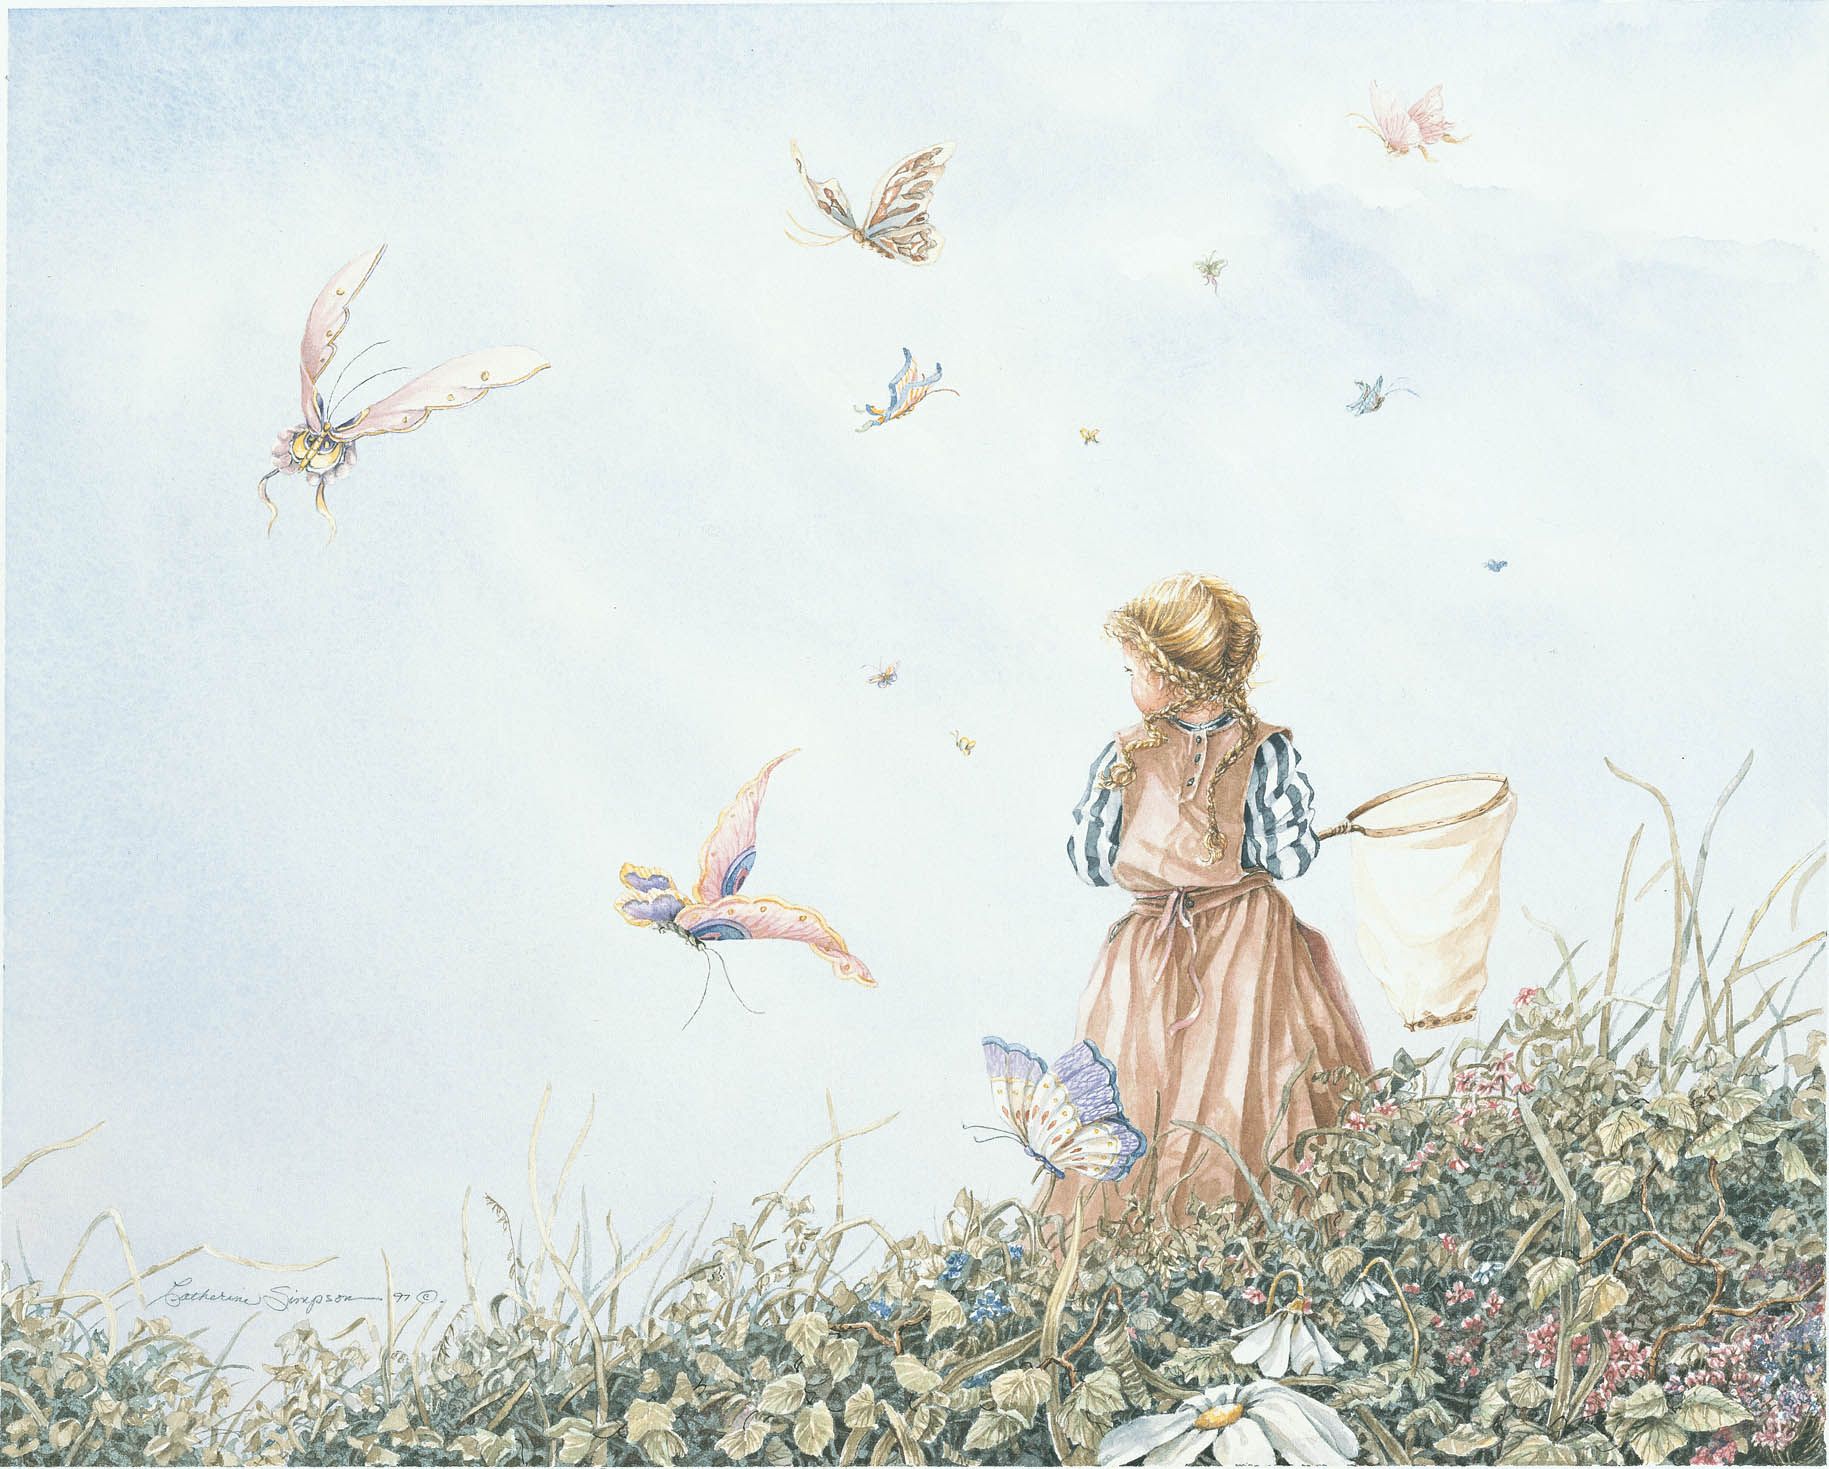 Chasing Butterflies by Catherine Simpson